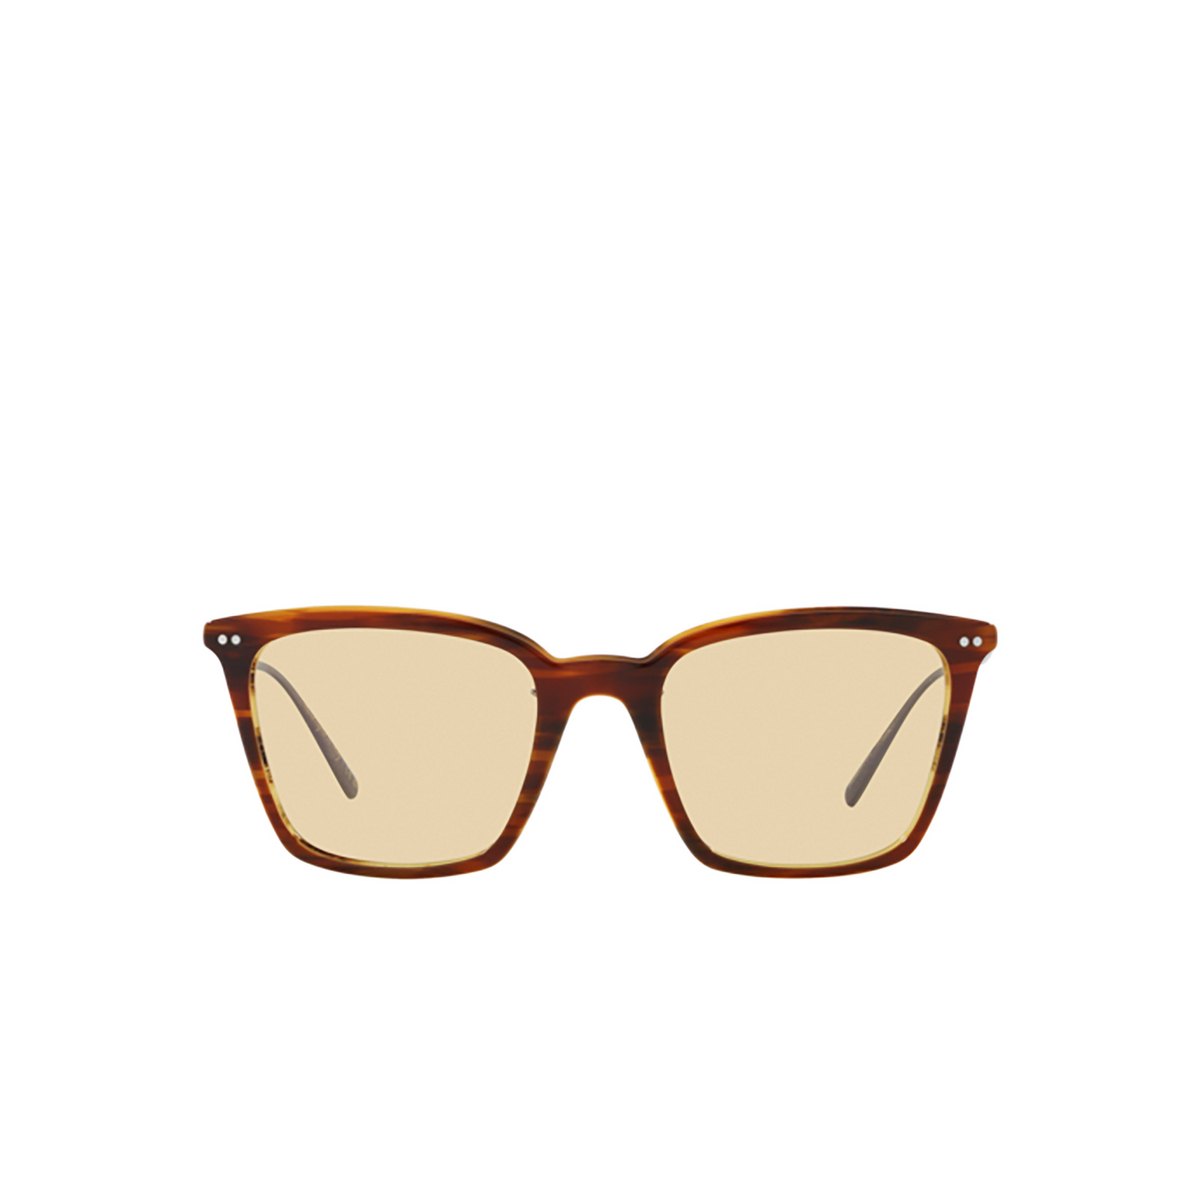 Oliver Peoples LUISELLA Sunglasses 1310M4 Amaretto / Striped Honey / Antique Gold - front view